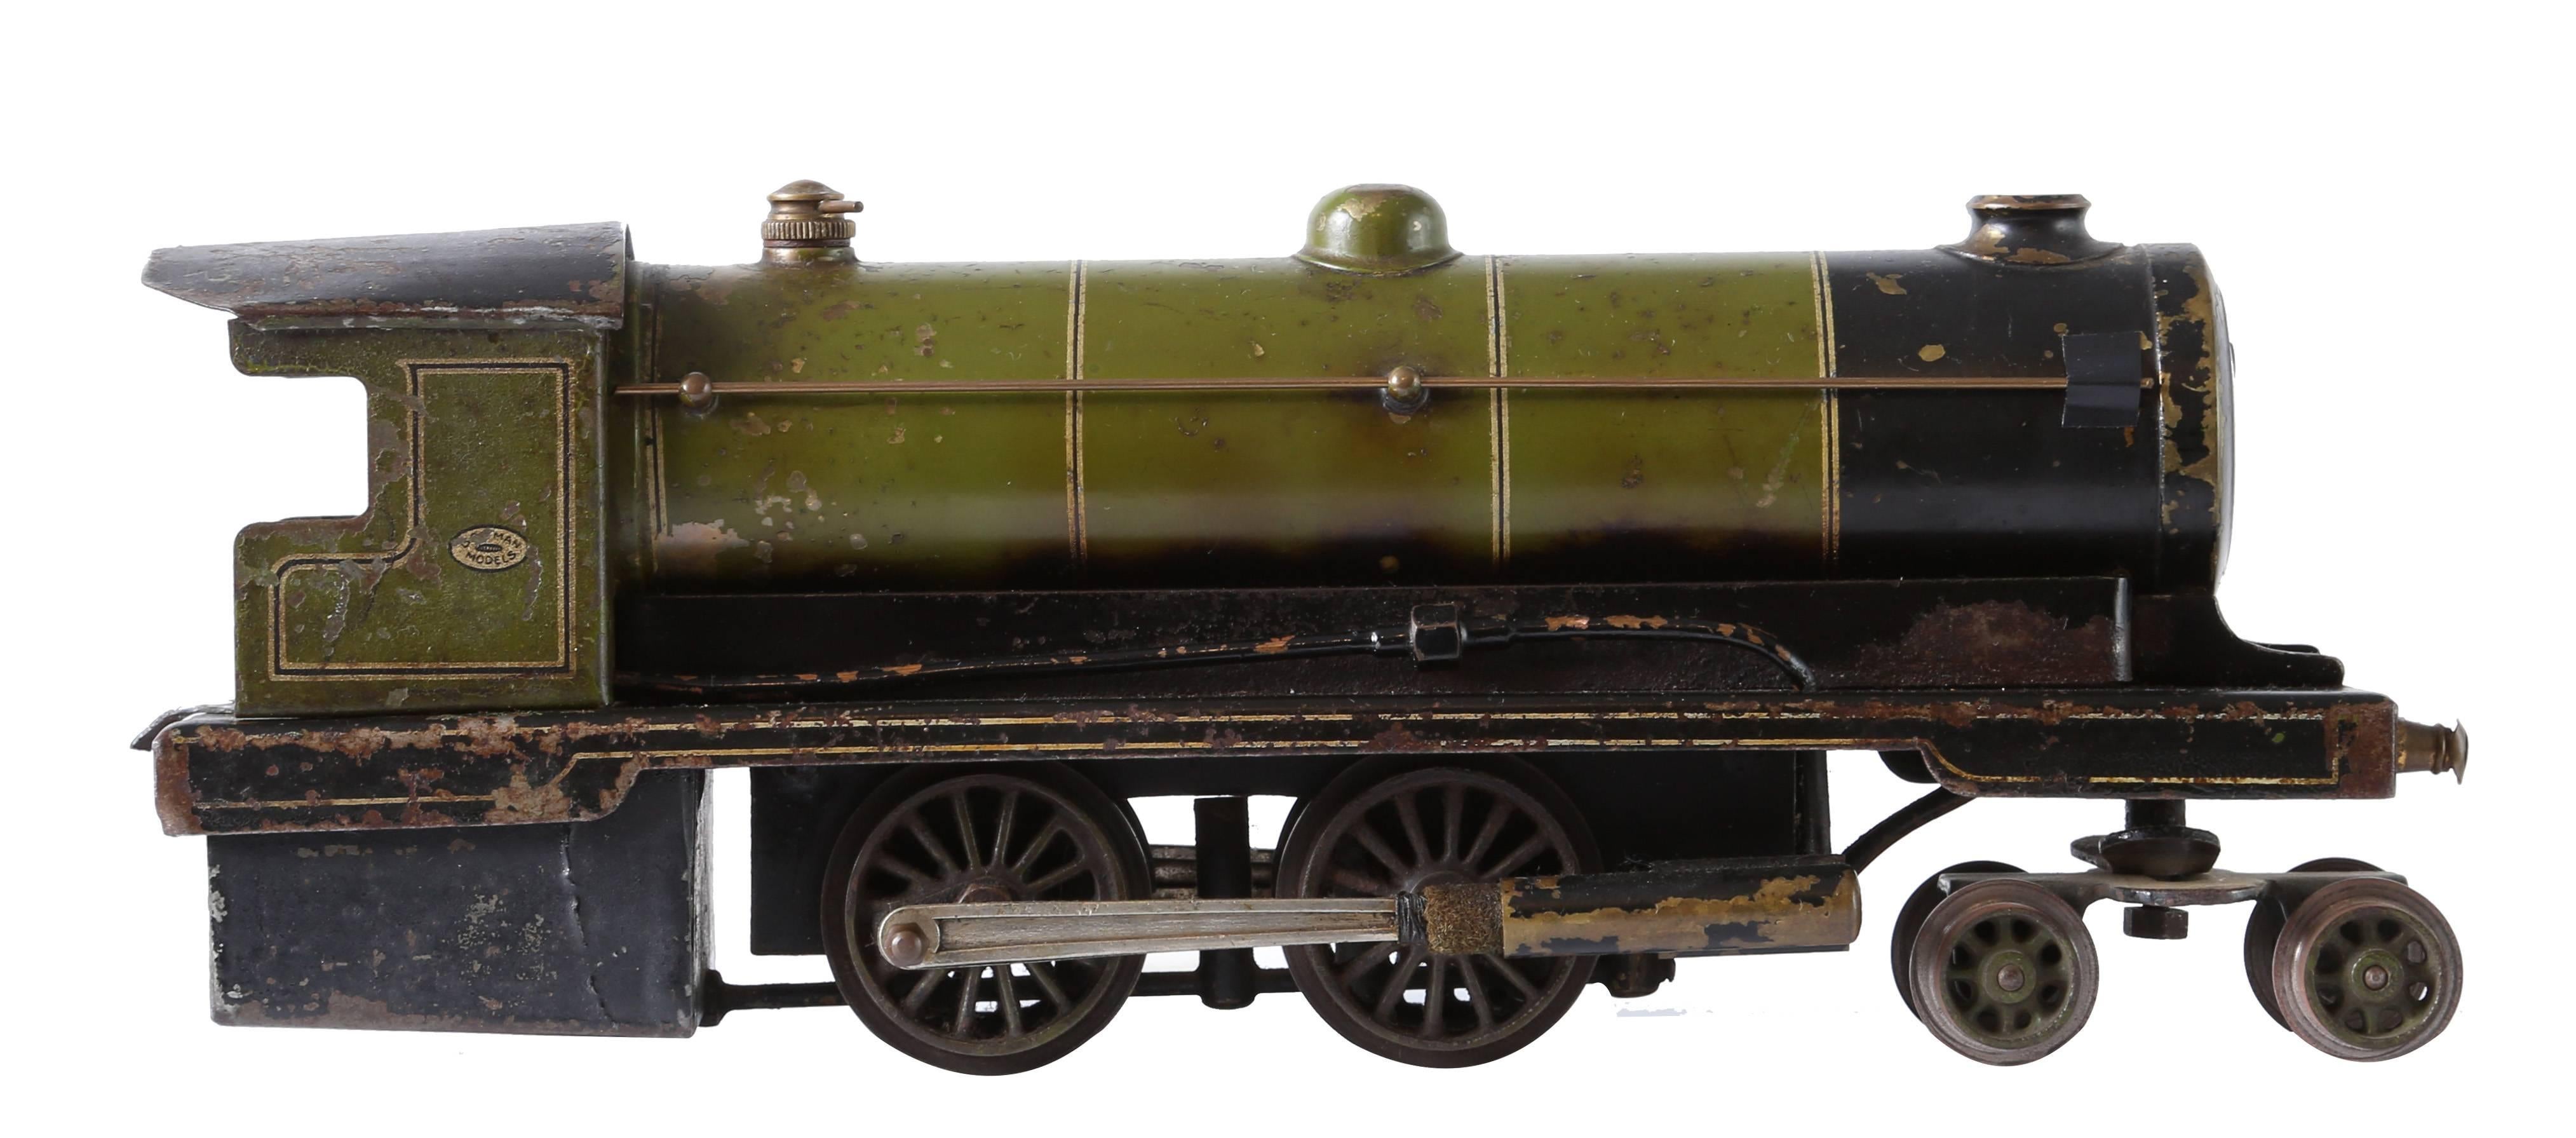 bowman steam engines for sale